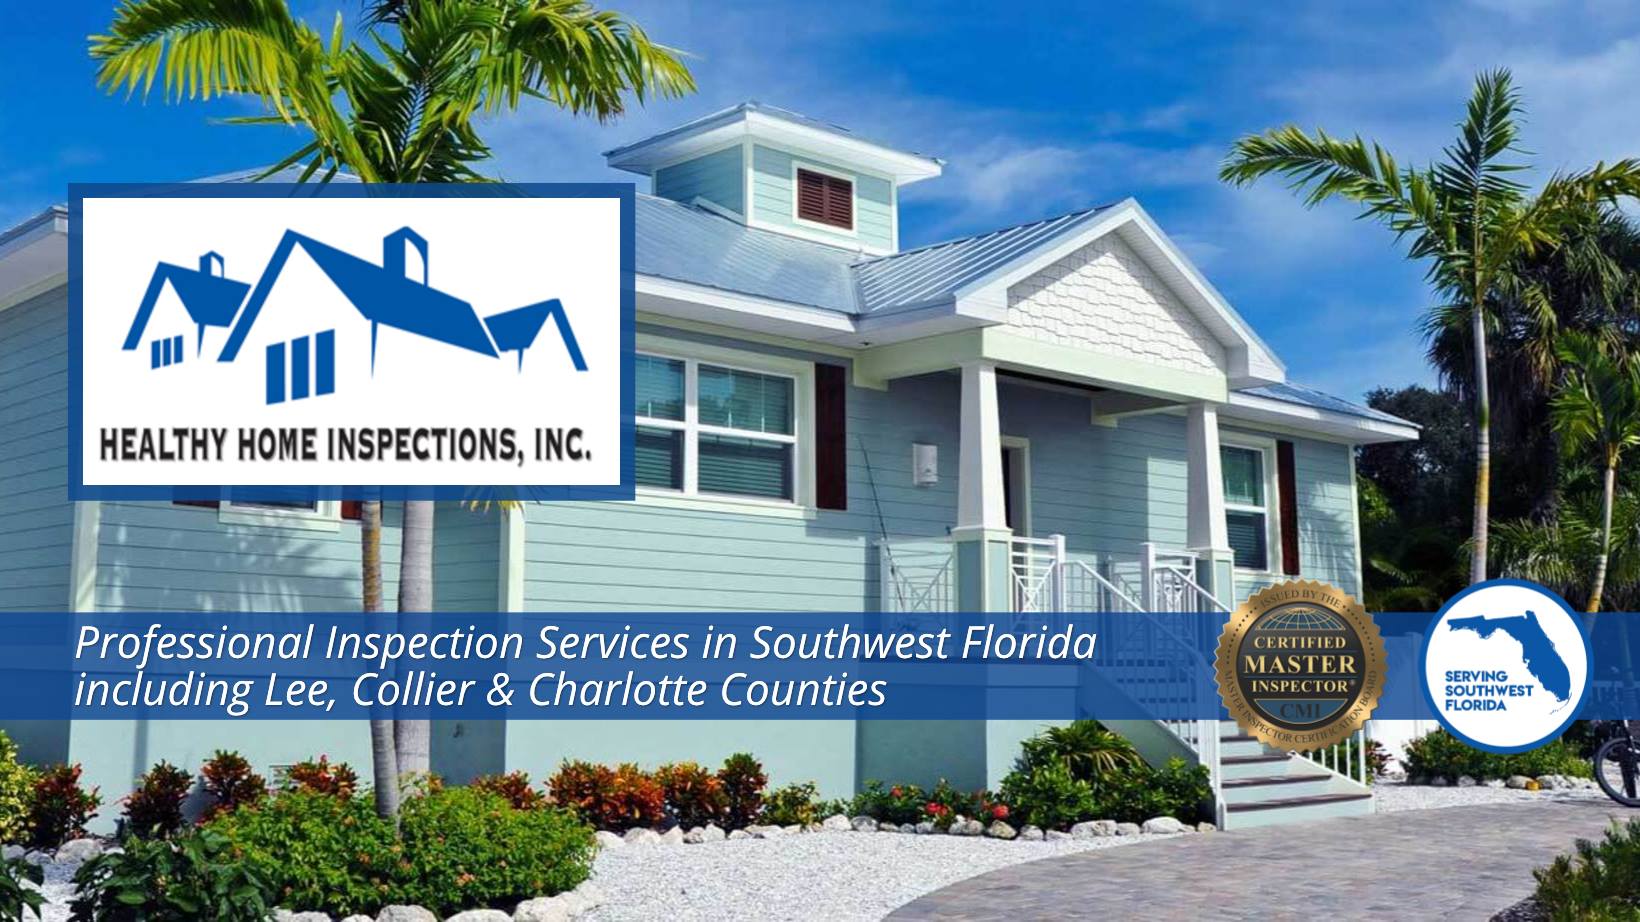 Most Florida insurance carriers today will require a four point inspection for homes 30 years old or older. Many insurance underwriters are even requiring them on newer homes.  The purpose of a four point inspection in Cape Coral is to determine if there are items that could potentially result in an insurance claim.  Some examples may include things like a leaking roof, exposed electrical, or faulty plumbing, just to name a few.